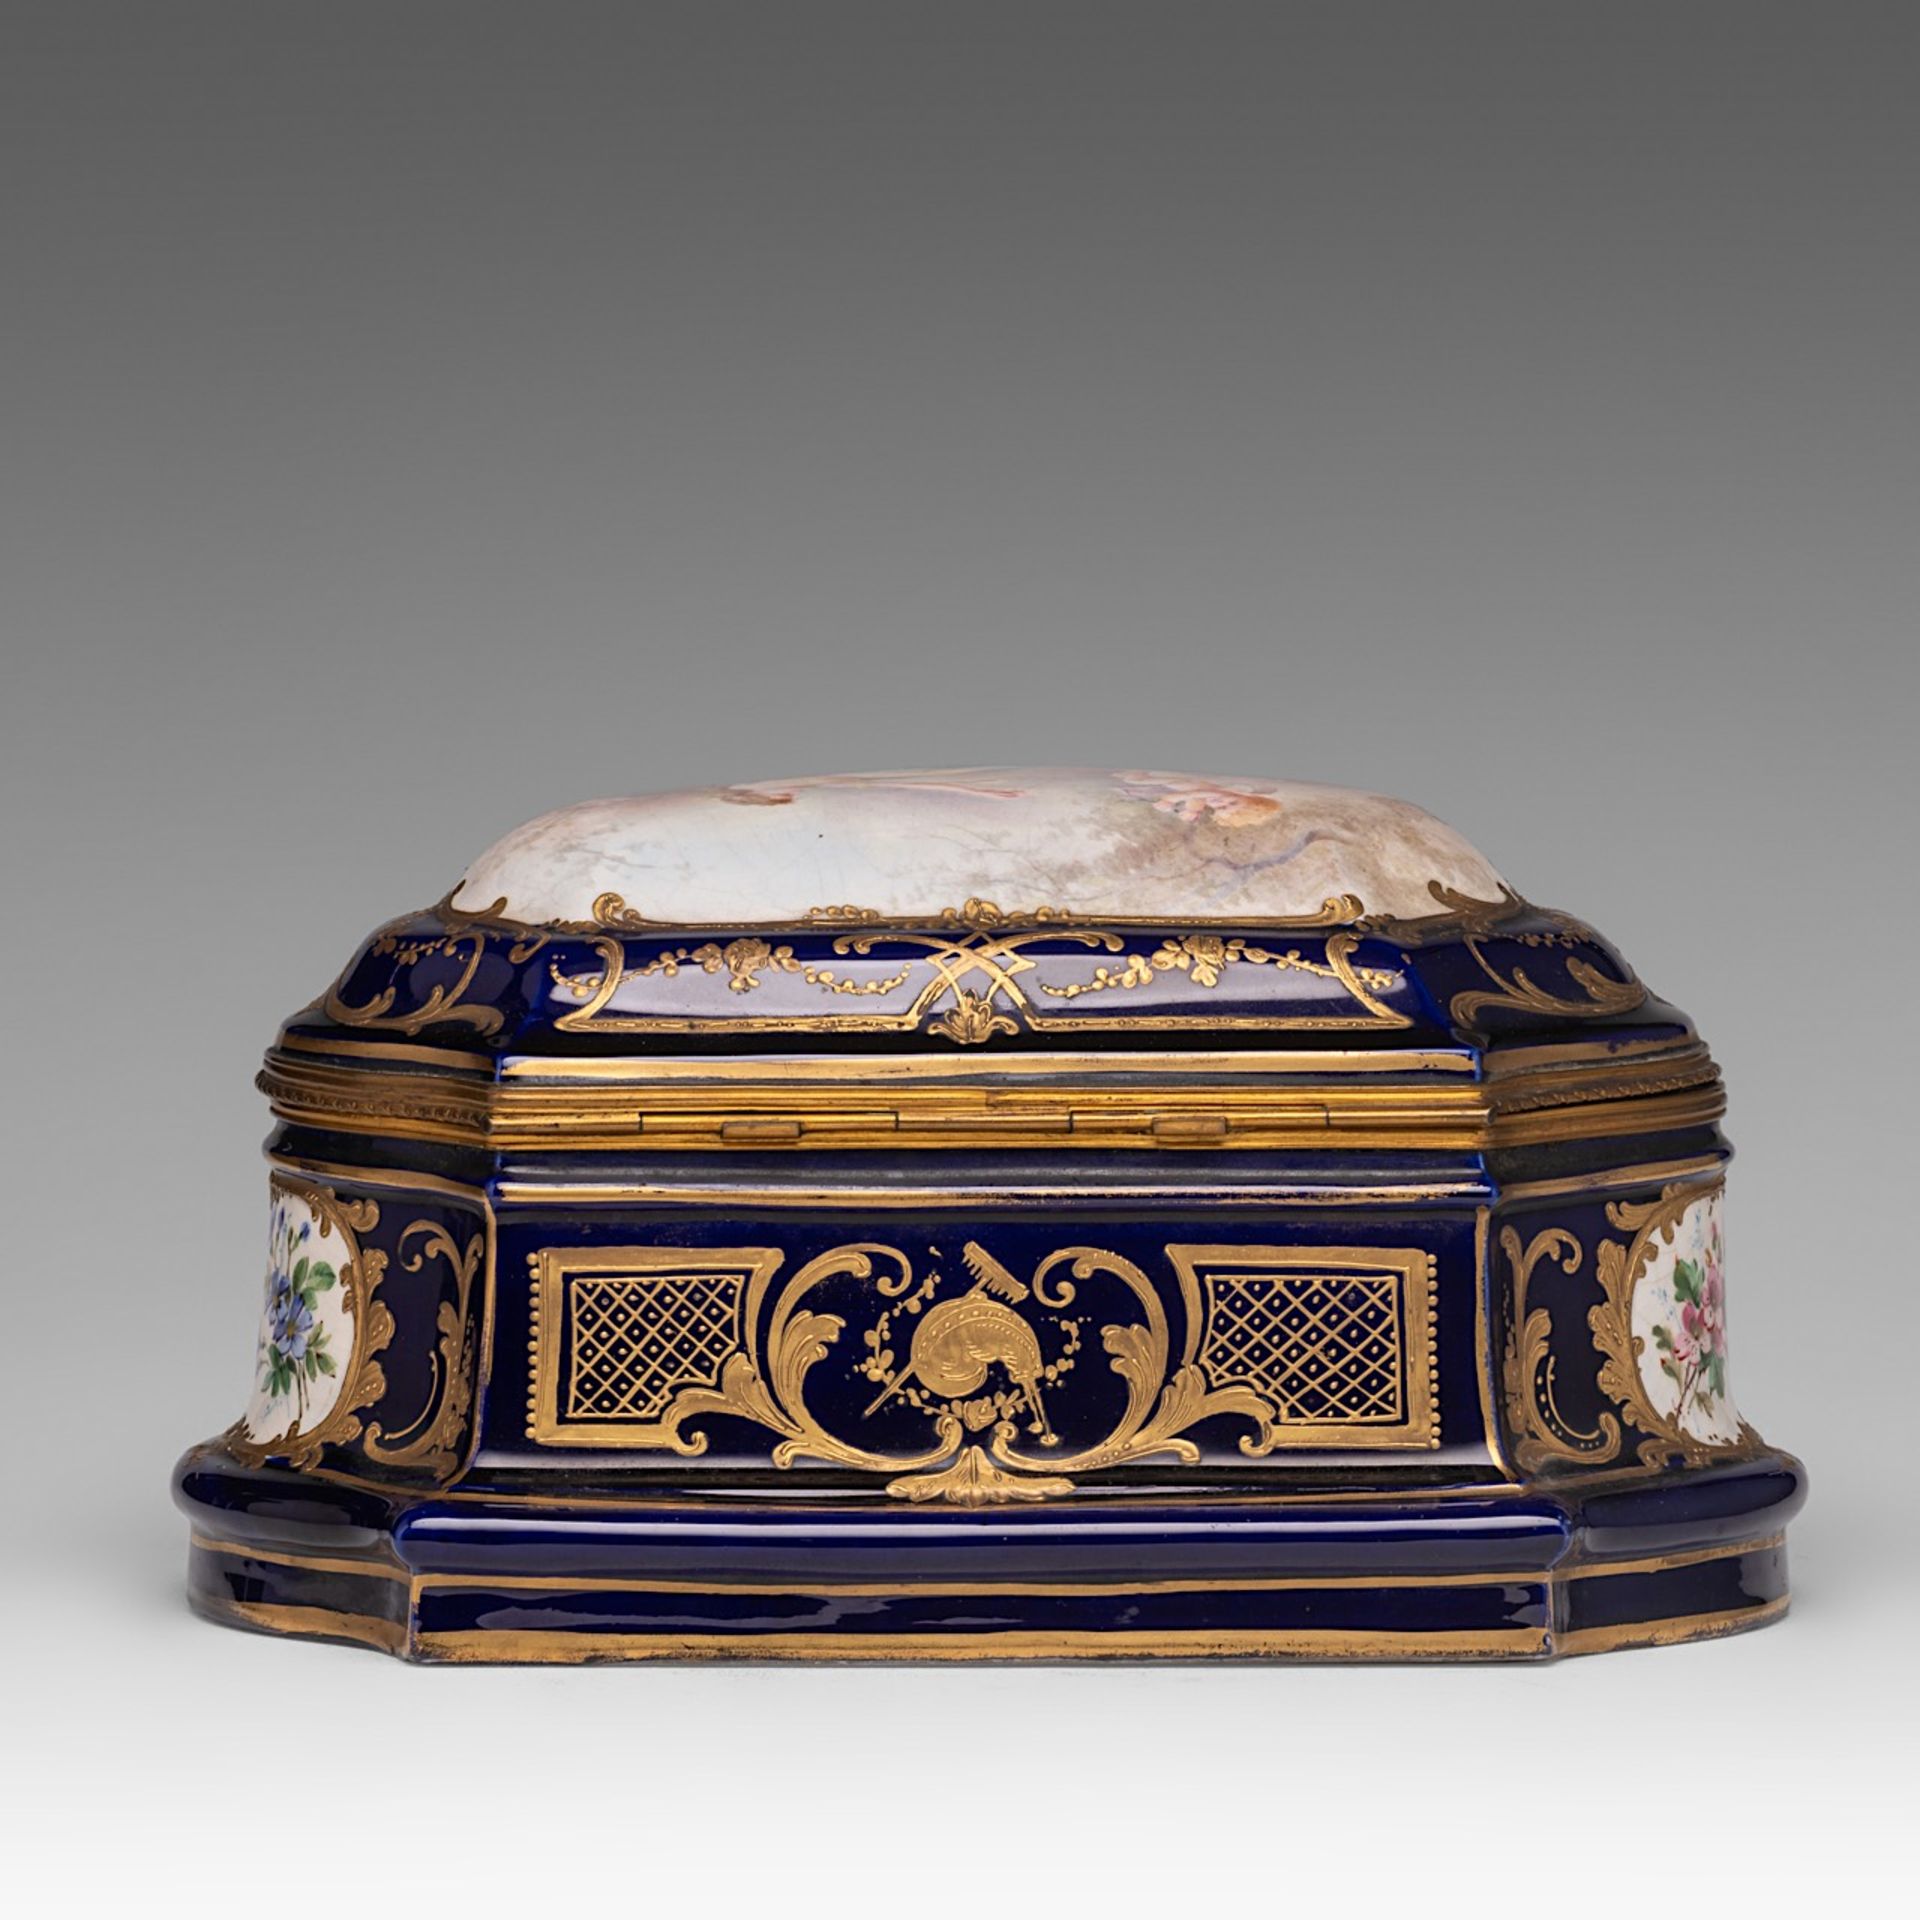 A fine bleu royale ground Sevres box with gilt decoration and hand-painted roundels, signed A. Collo - Image 4 of 12